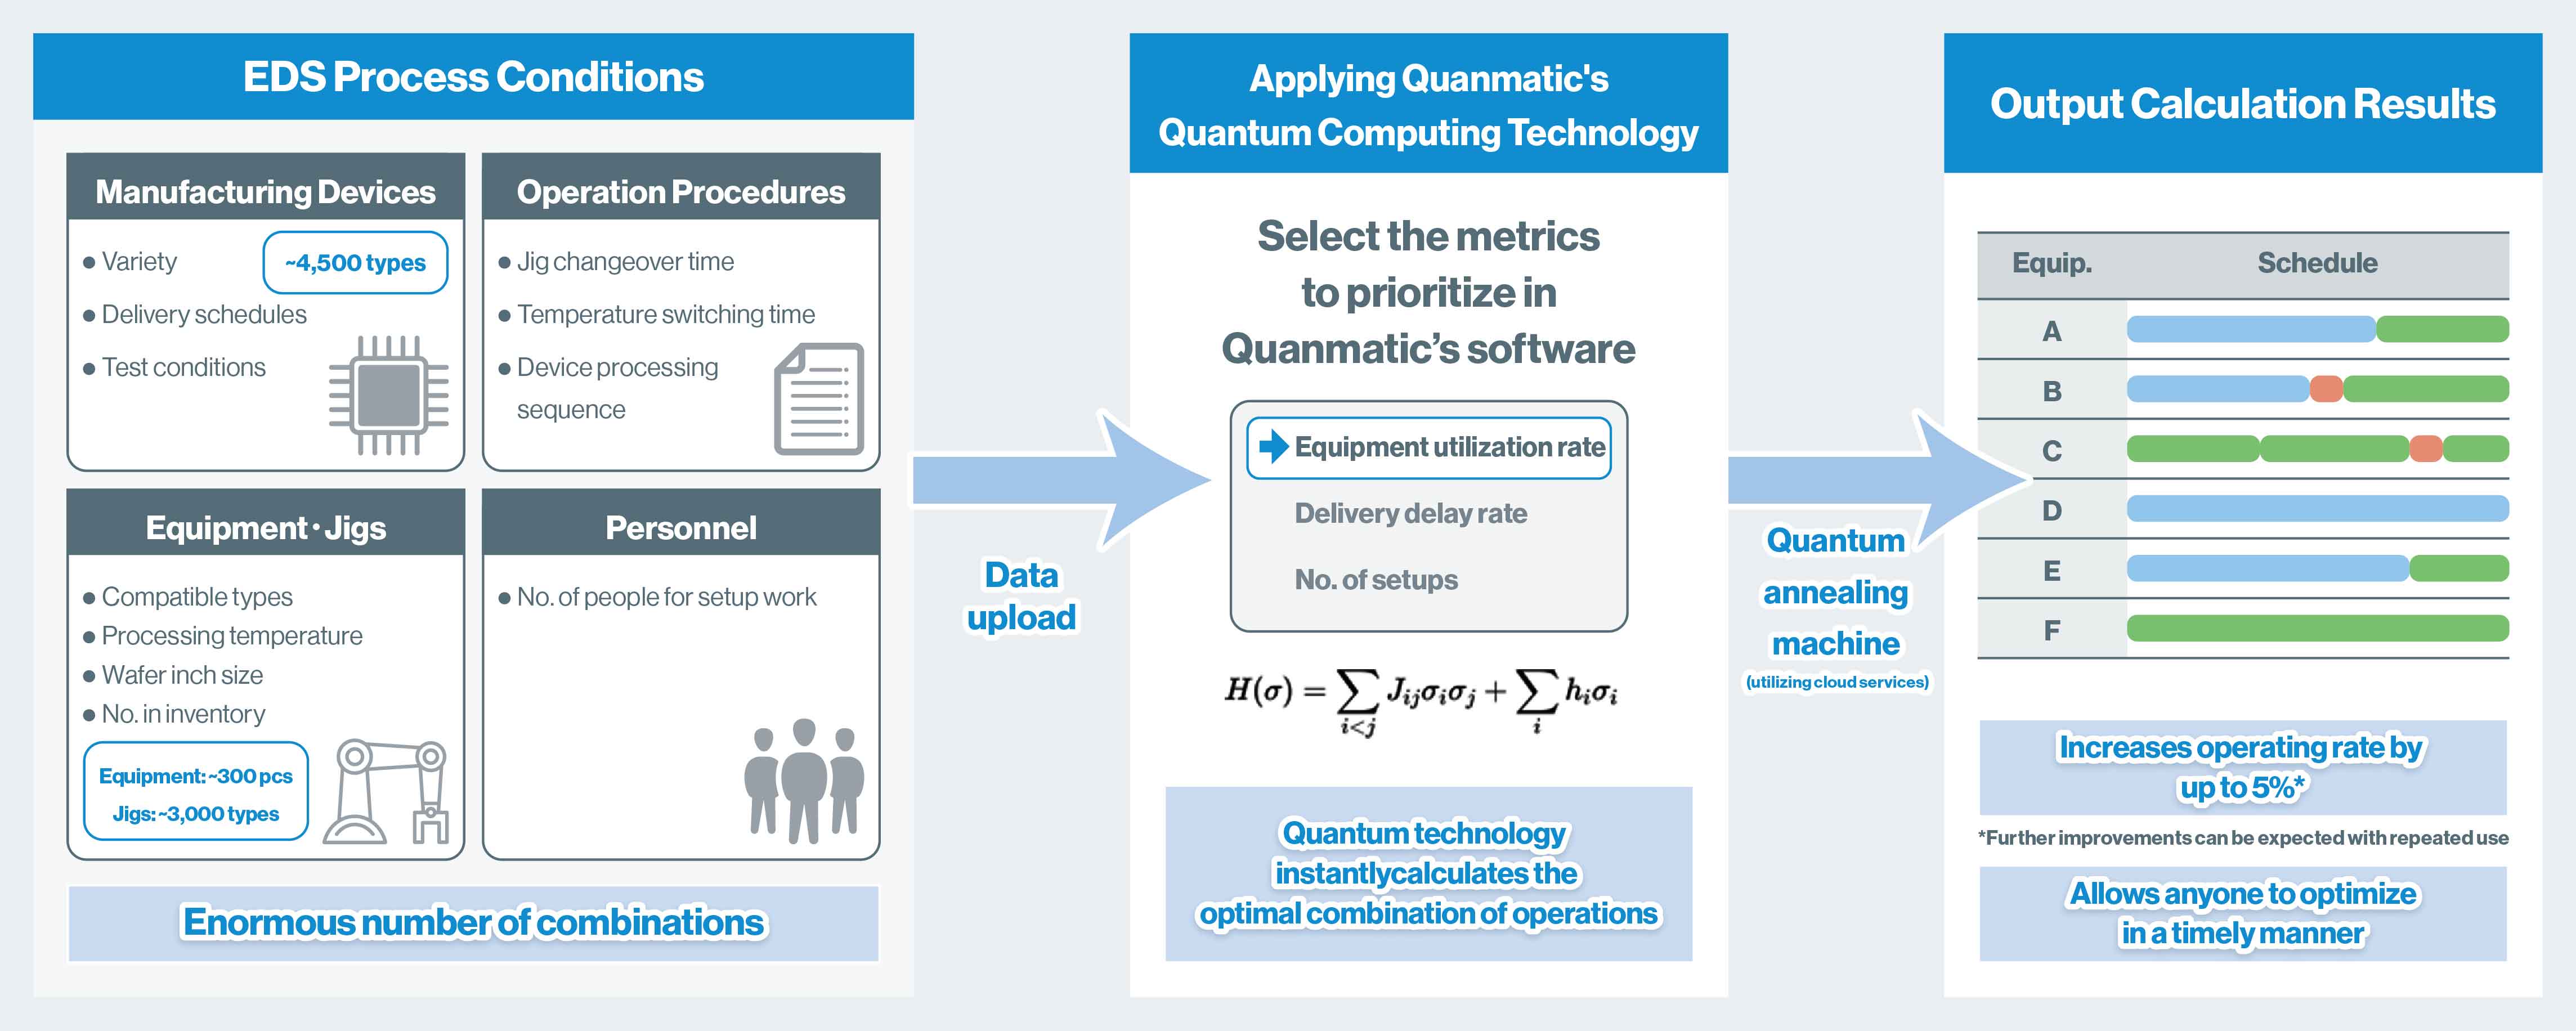 Manufacturing Process Optimization – by applying Quanmatic's Quantum Technology